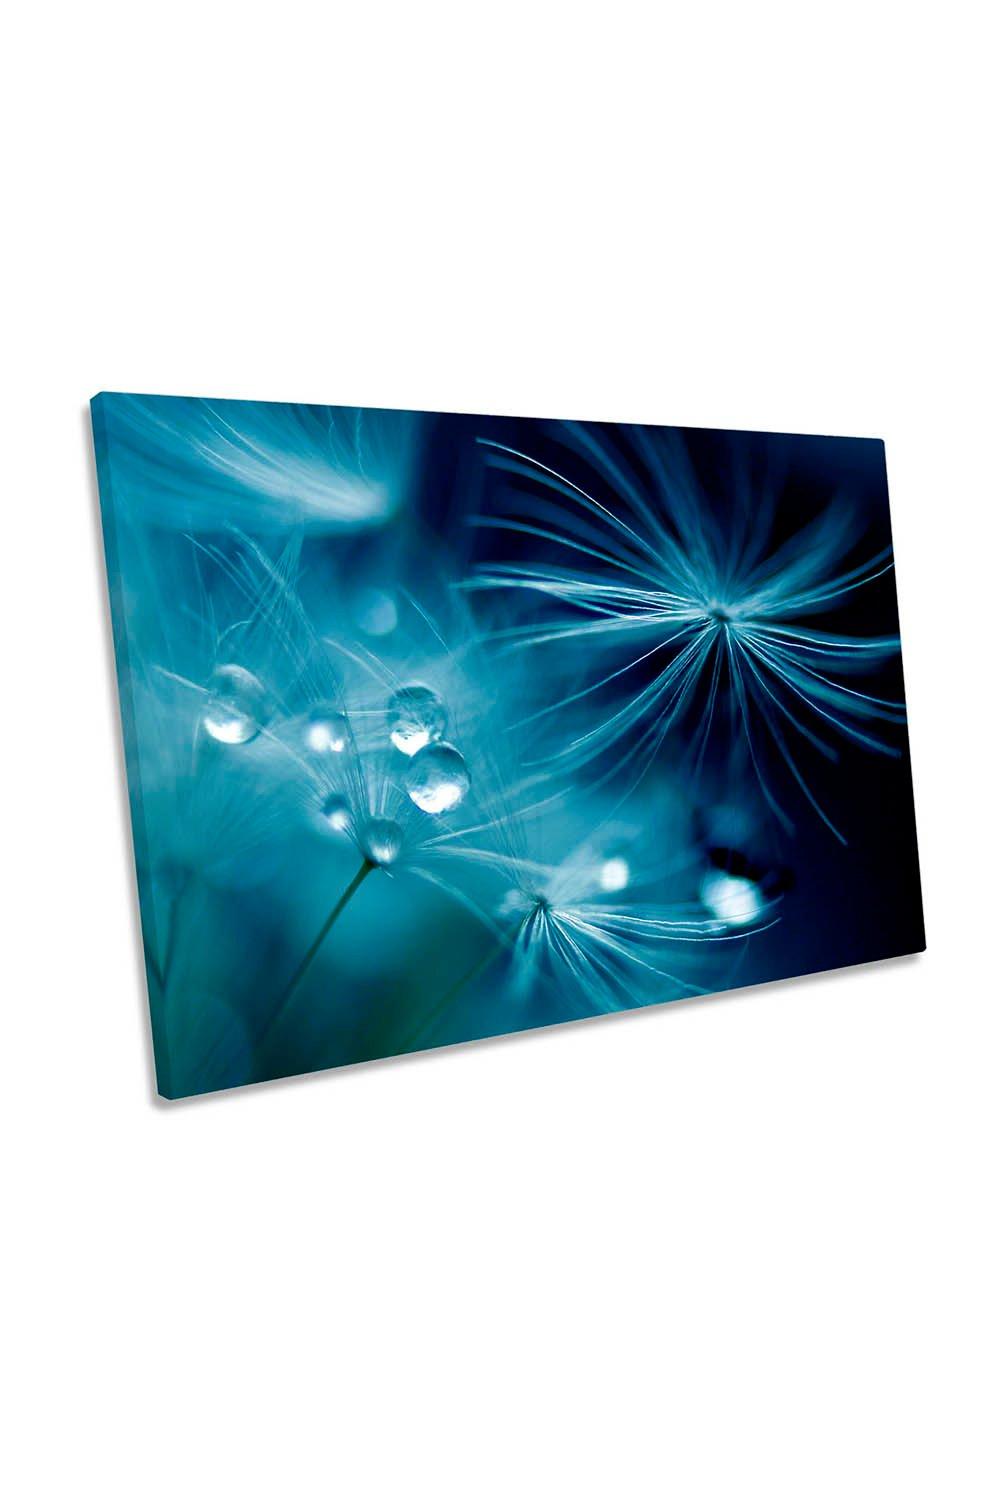 Soft Touch Blue Floral Flowers Canvas Wall Art Picture Print